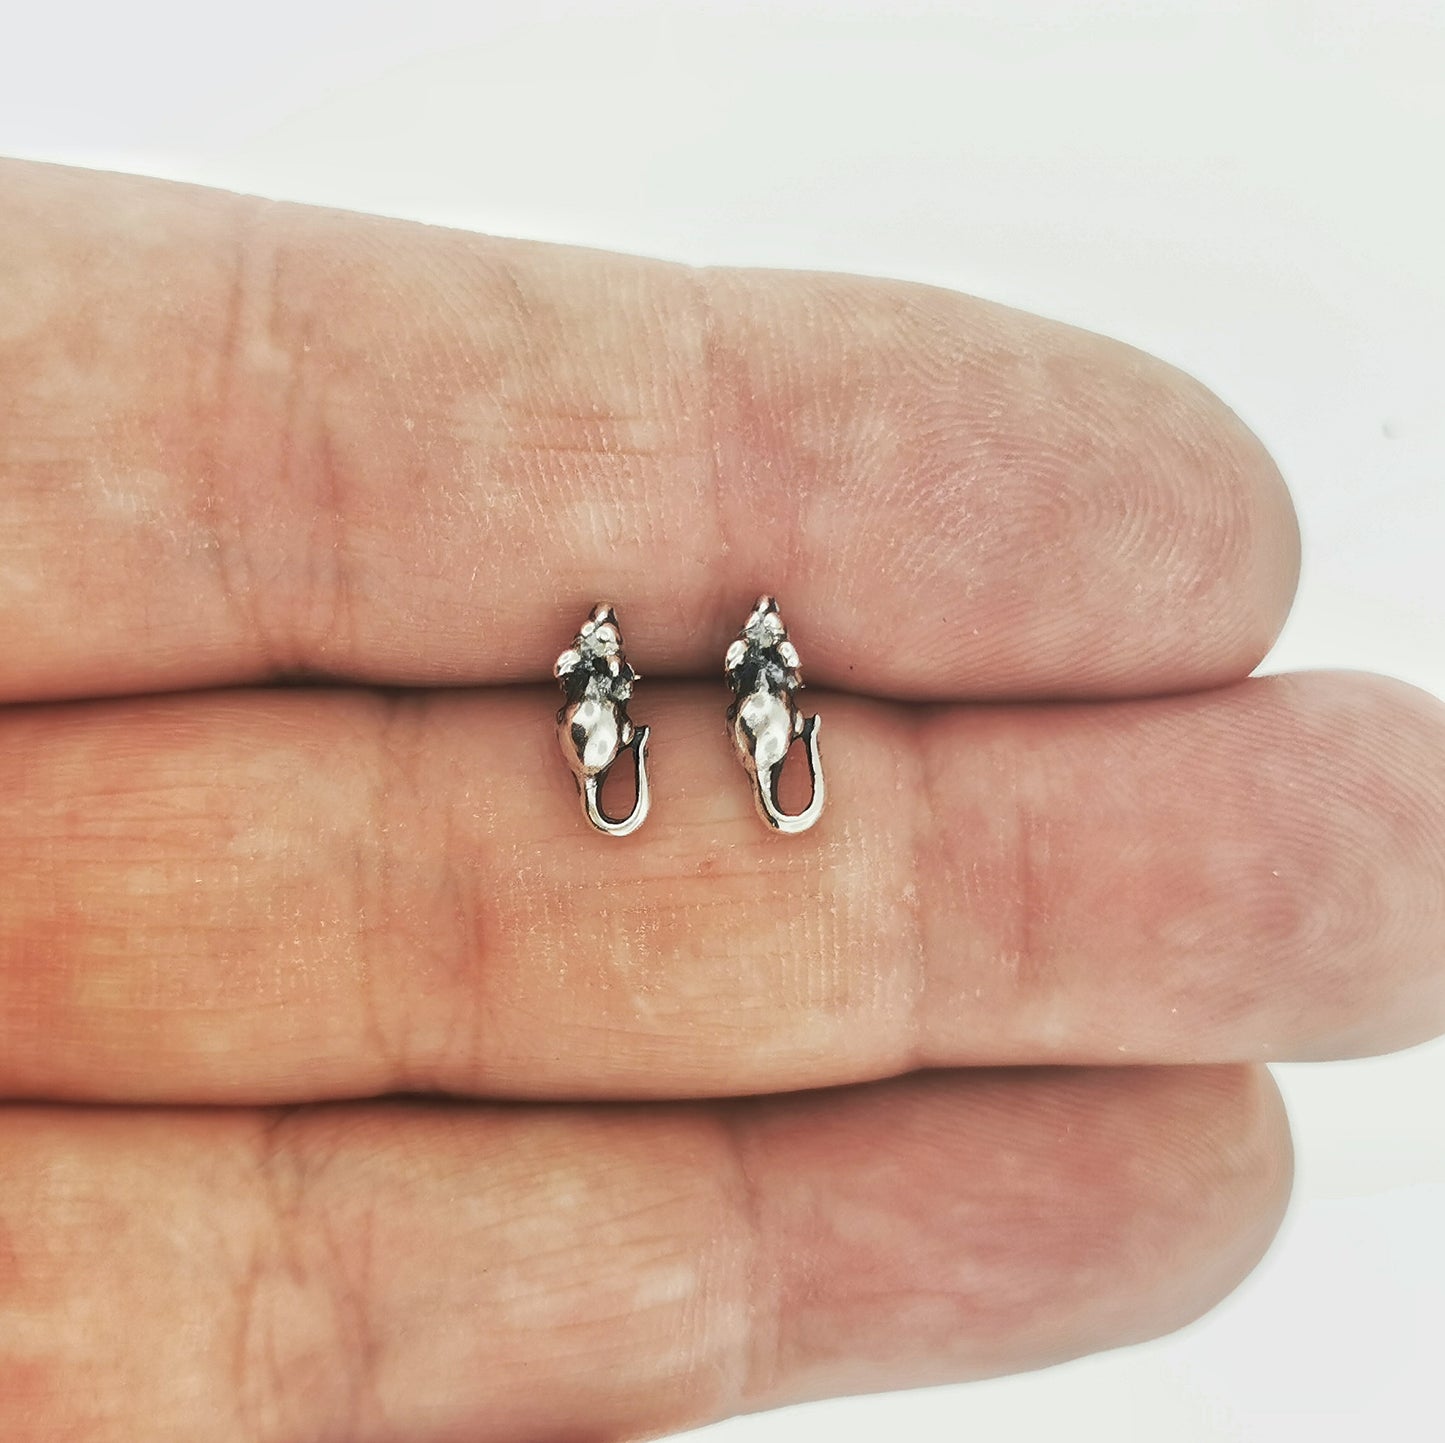 Sterling Silver Mouse Stud Earrings, Small Silver Stud Earrings, Silver Mouse Earrings, Silver Mice Earrings, Silver Animal Earrings, Small Silver Earrings, Second Hole Earrings, Childrens Silver Earrings, Silver Animal Jewelry, Silver Animal Jewellery, Silver Mouse Jewelry, Silver Mouse Jewellery, Silver Mouse Studs